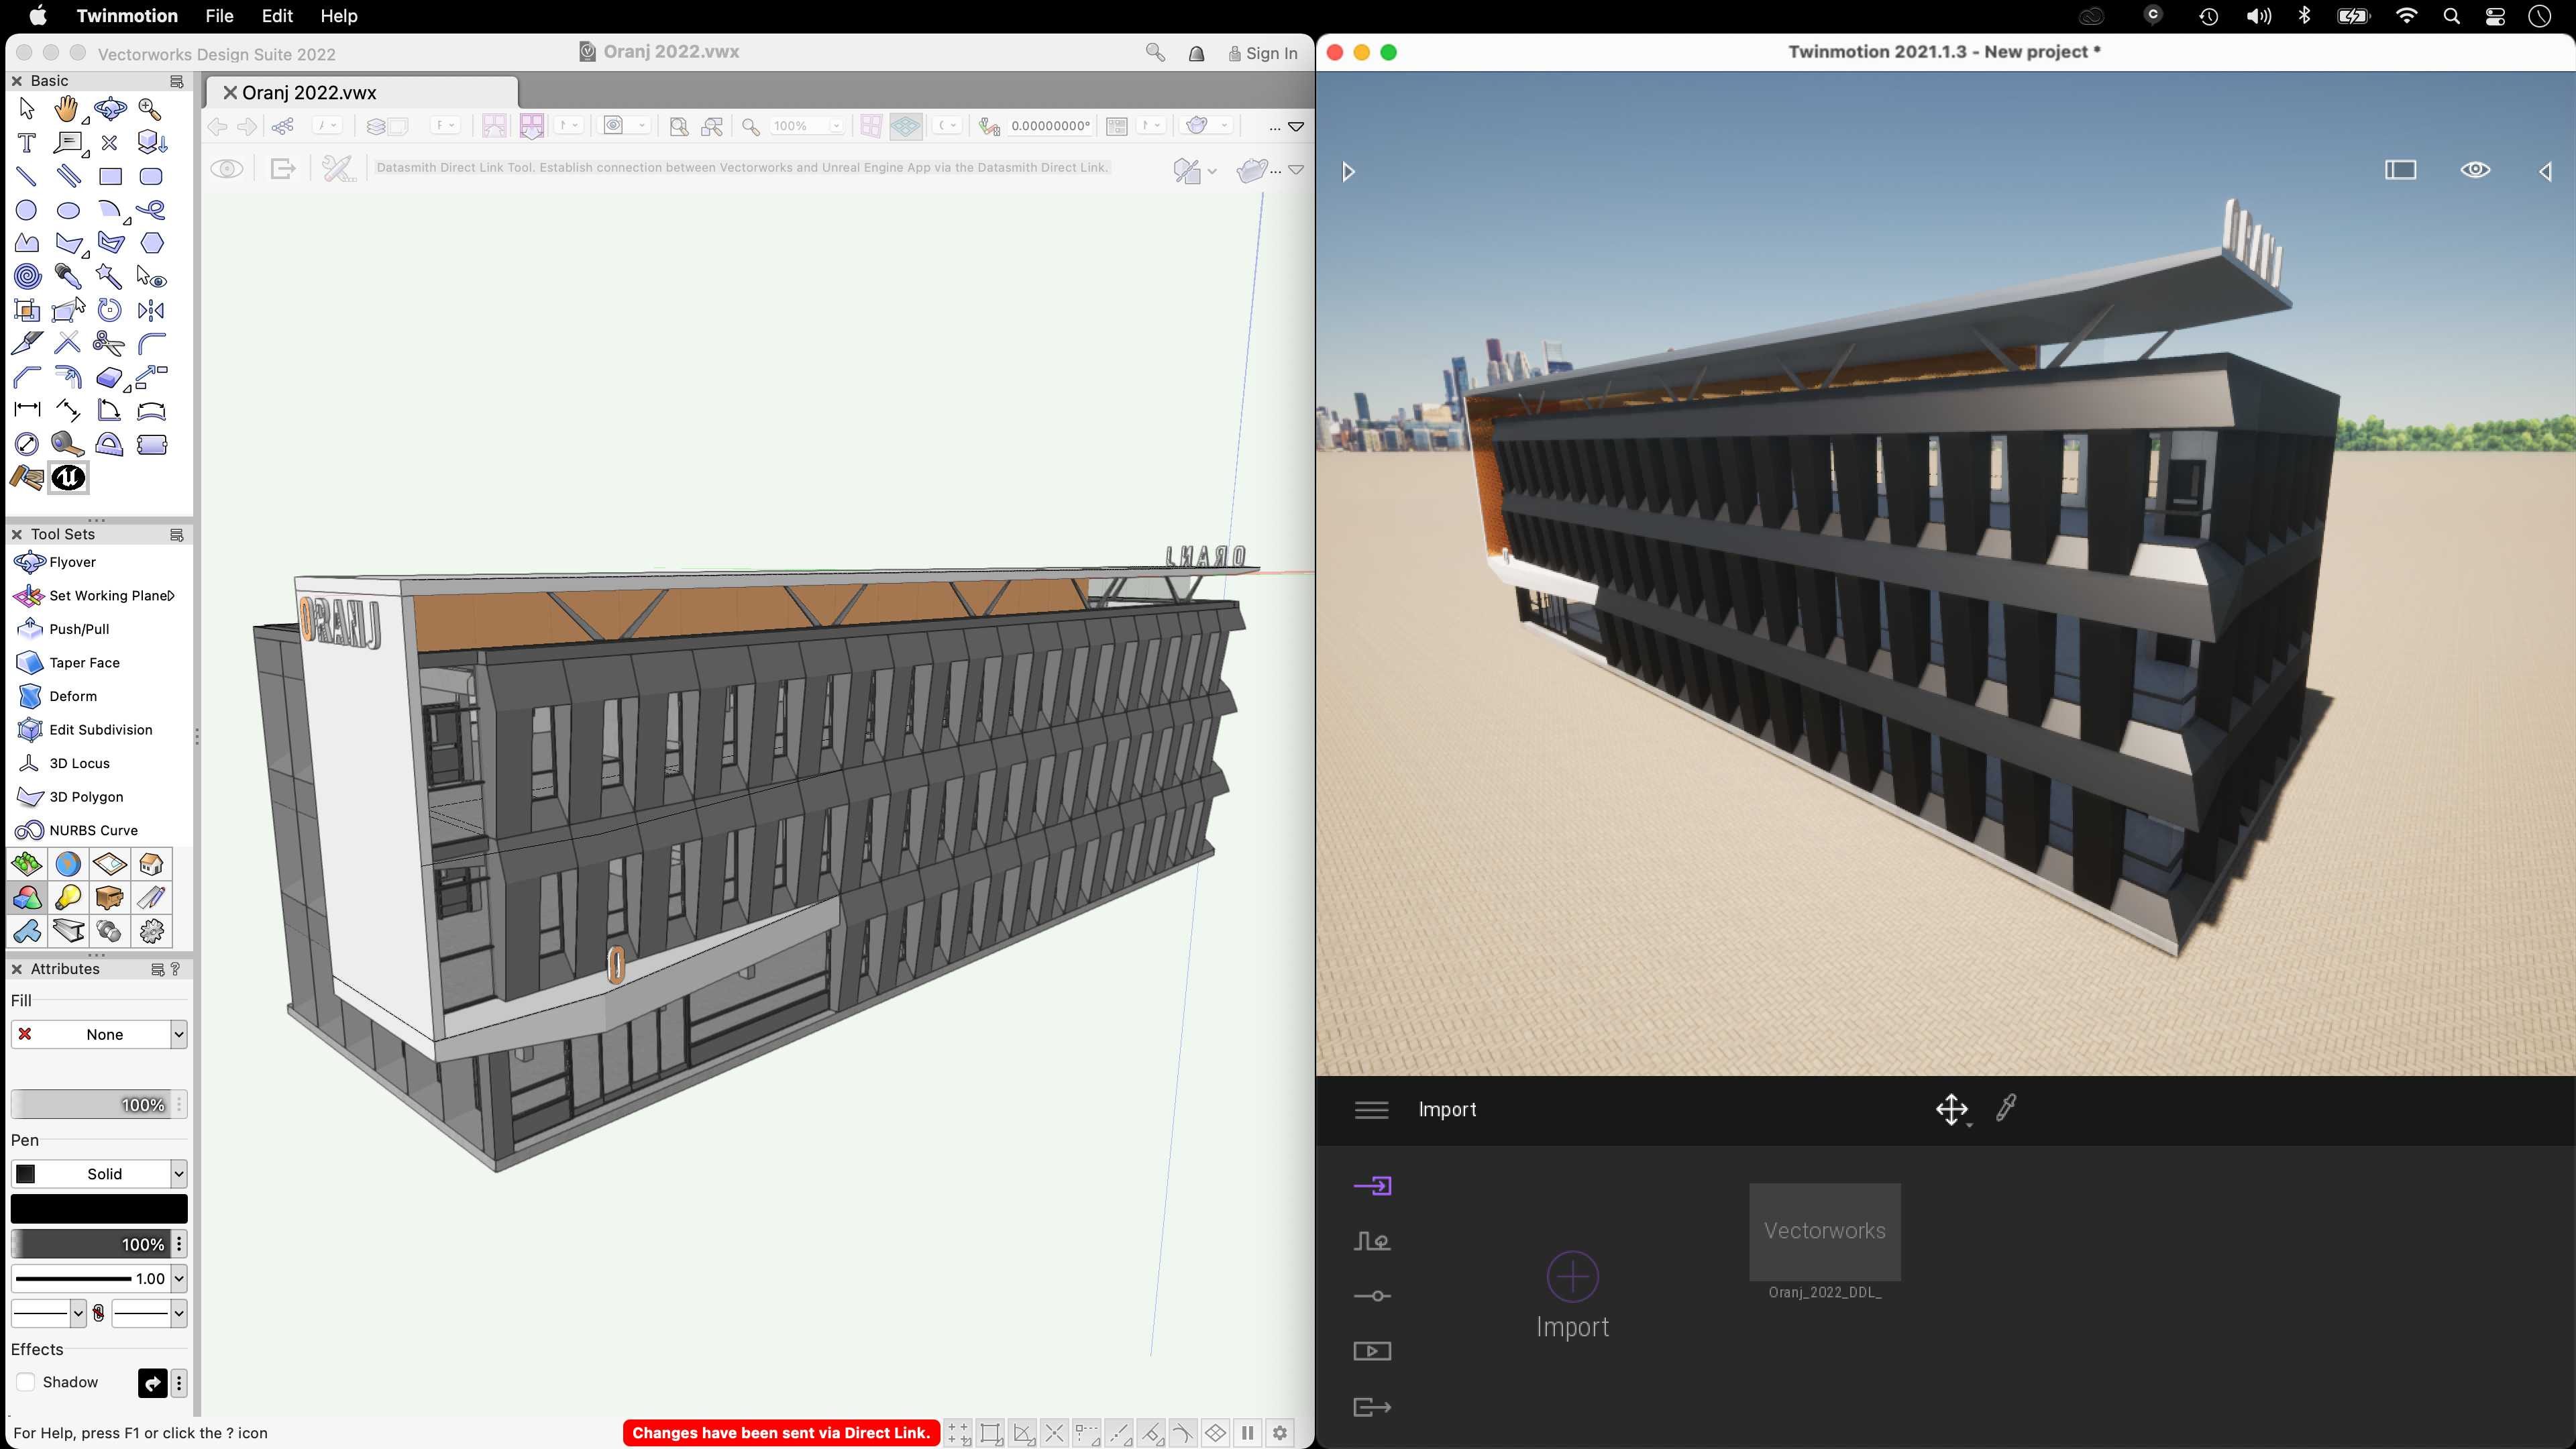 What Are the Best Twinmotion Features to Use with Vectorworks?